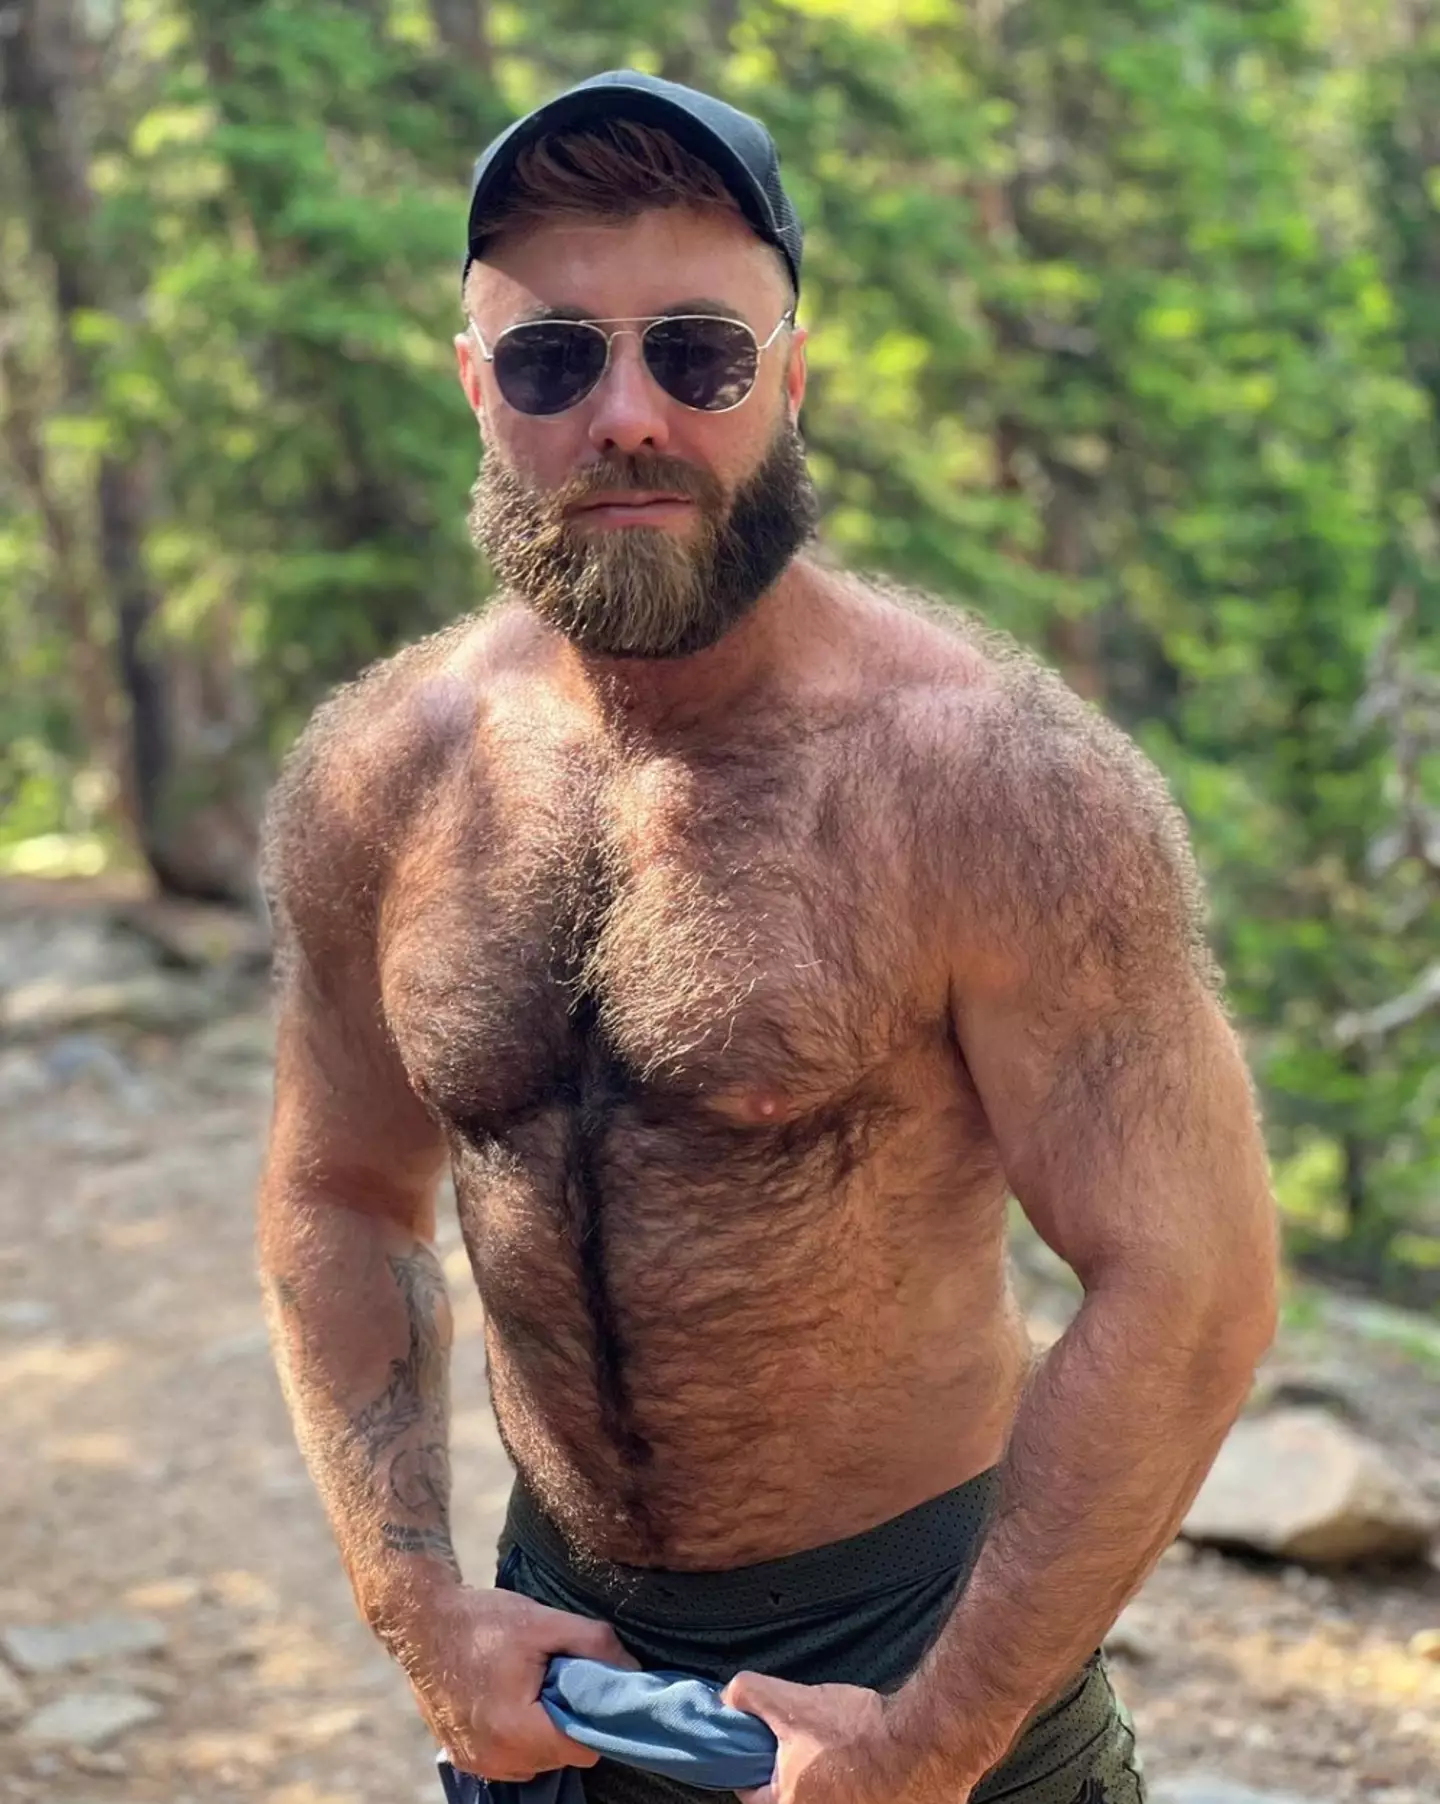 Mr Teddybear opened up about how ex partners would demand him to shave his body hair.